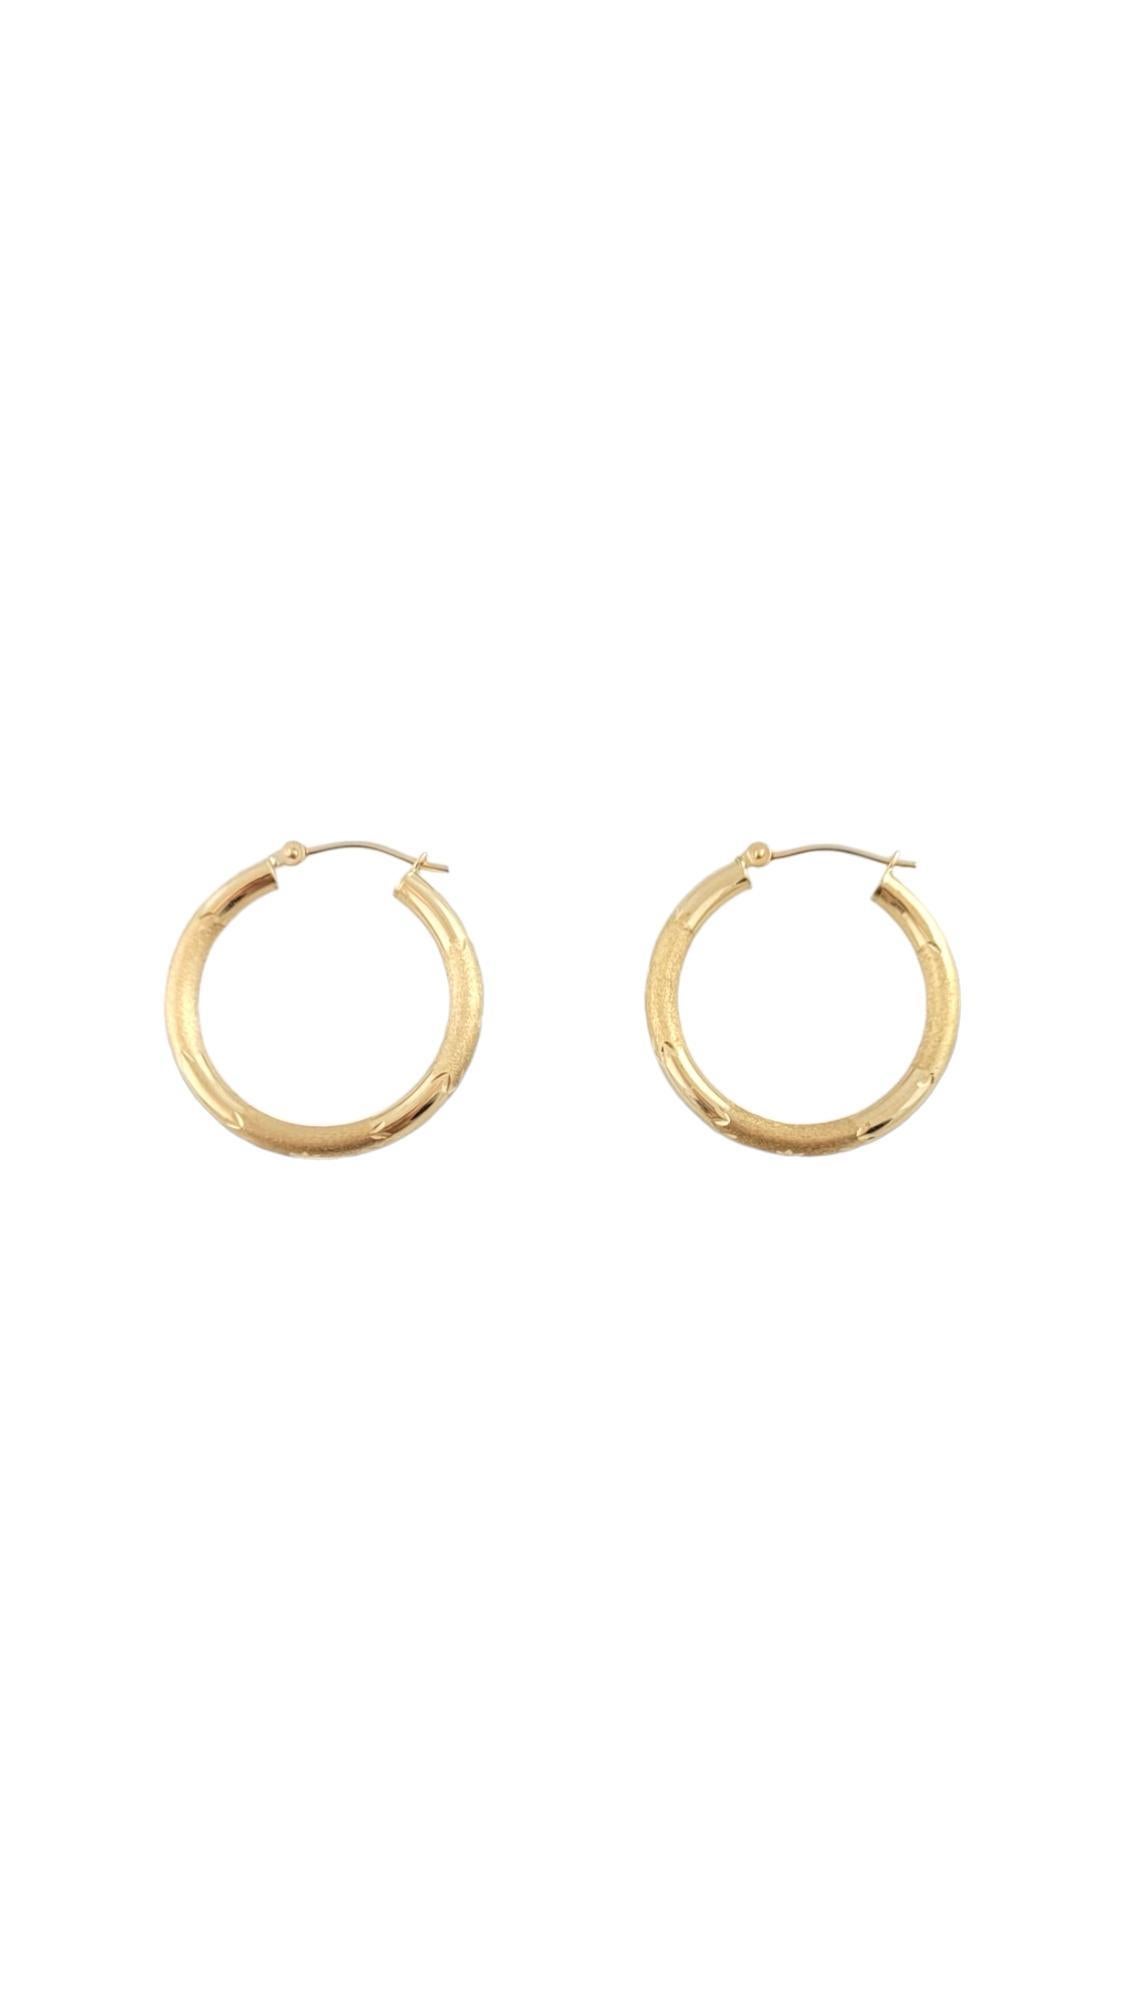 Vintage 14K Yellow Gold Hoop Earrings 

Hoop earrings in 14K yellow gold with designs.

Weight: 1.9 g/ 1.2 dwt

Hallmark: 14K ISRAEL

Size: 26.6 mm X 3 mm X 3 mm

Approximately 3 mm thick.

Very good condition, professionally polished.

Will come